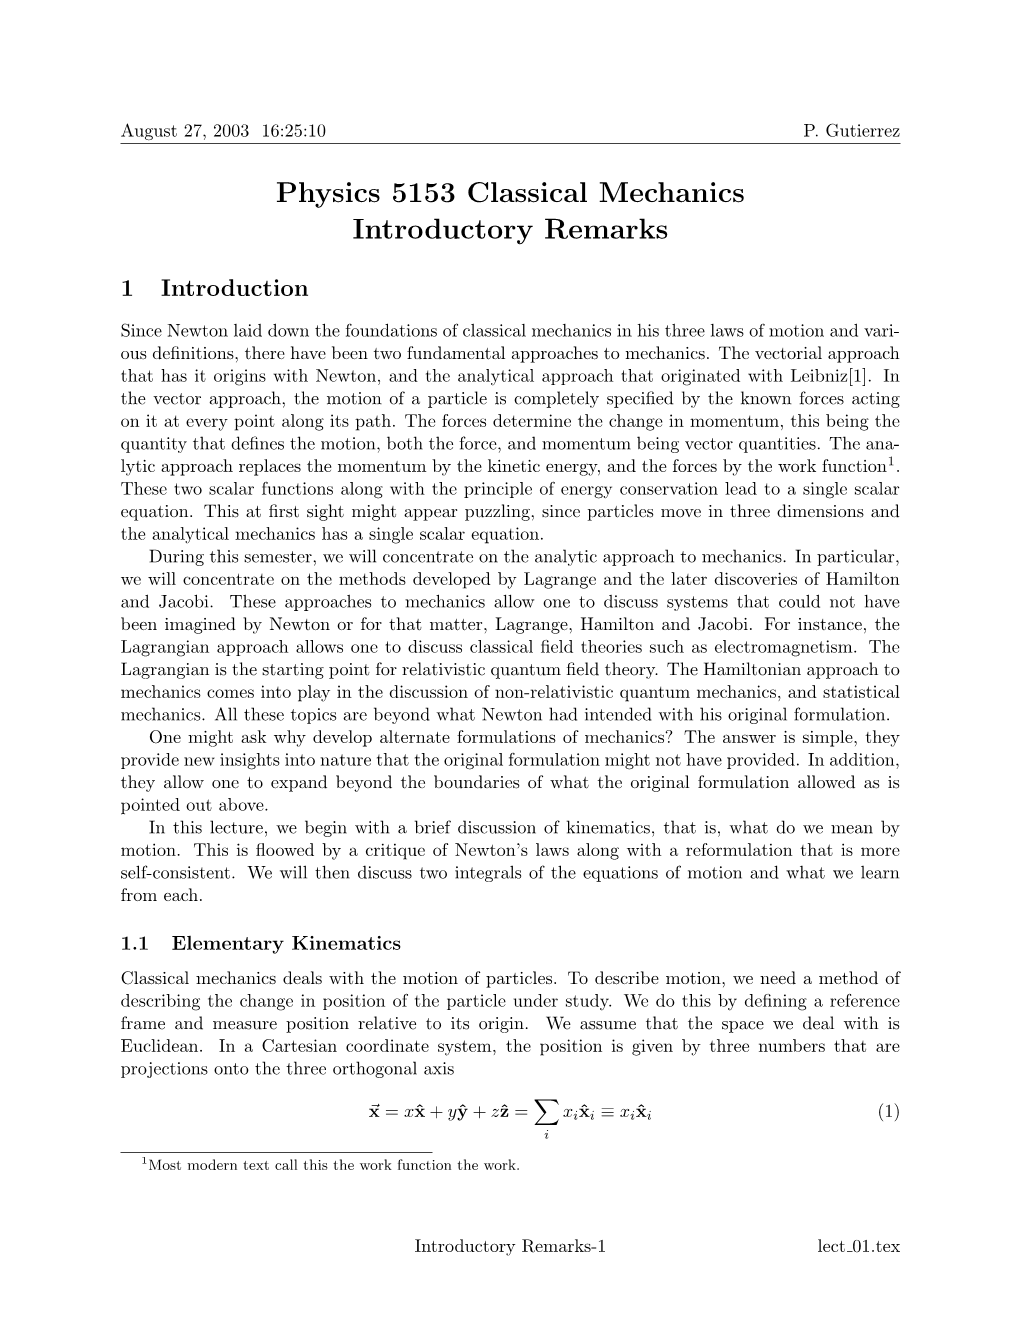 Physics 5153 Classical Mechanics Introductory Remarks